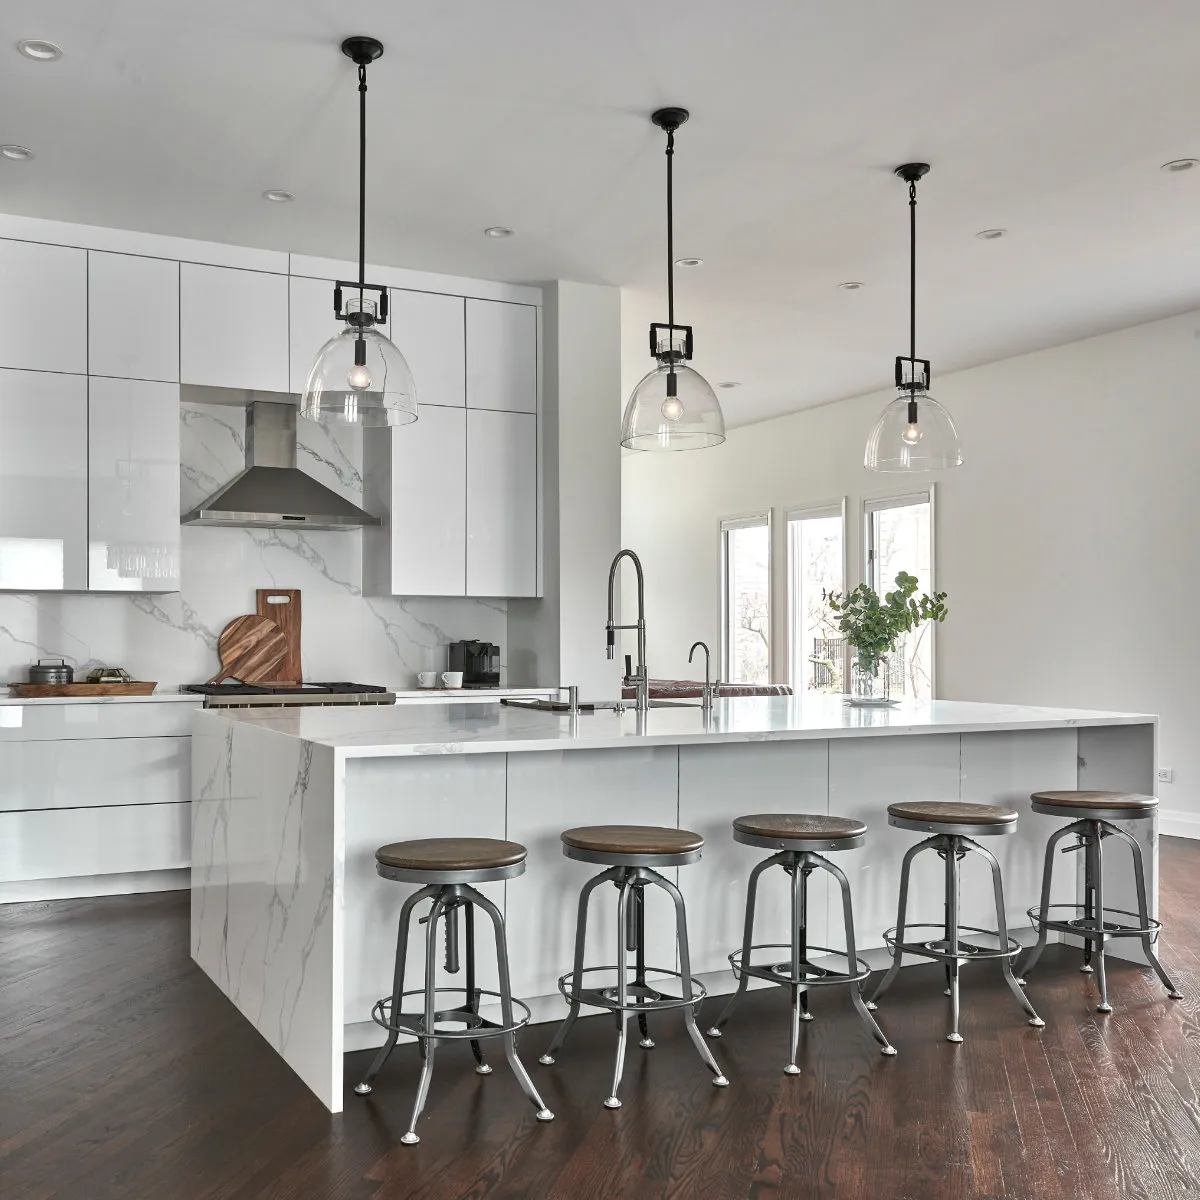 Kitchen remodeling in the Scottsdale area